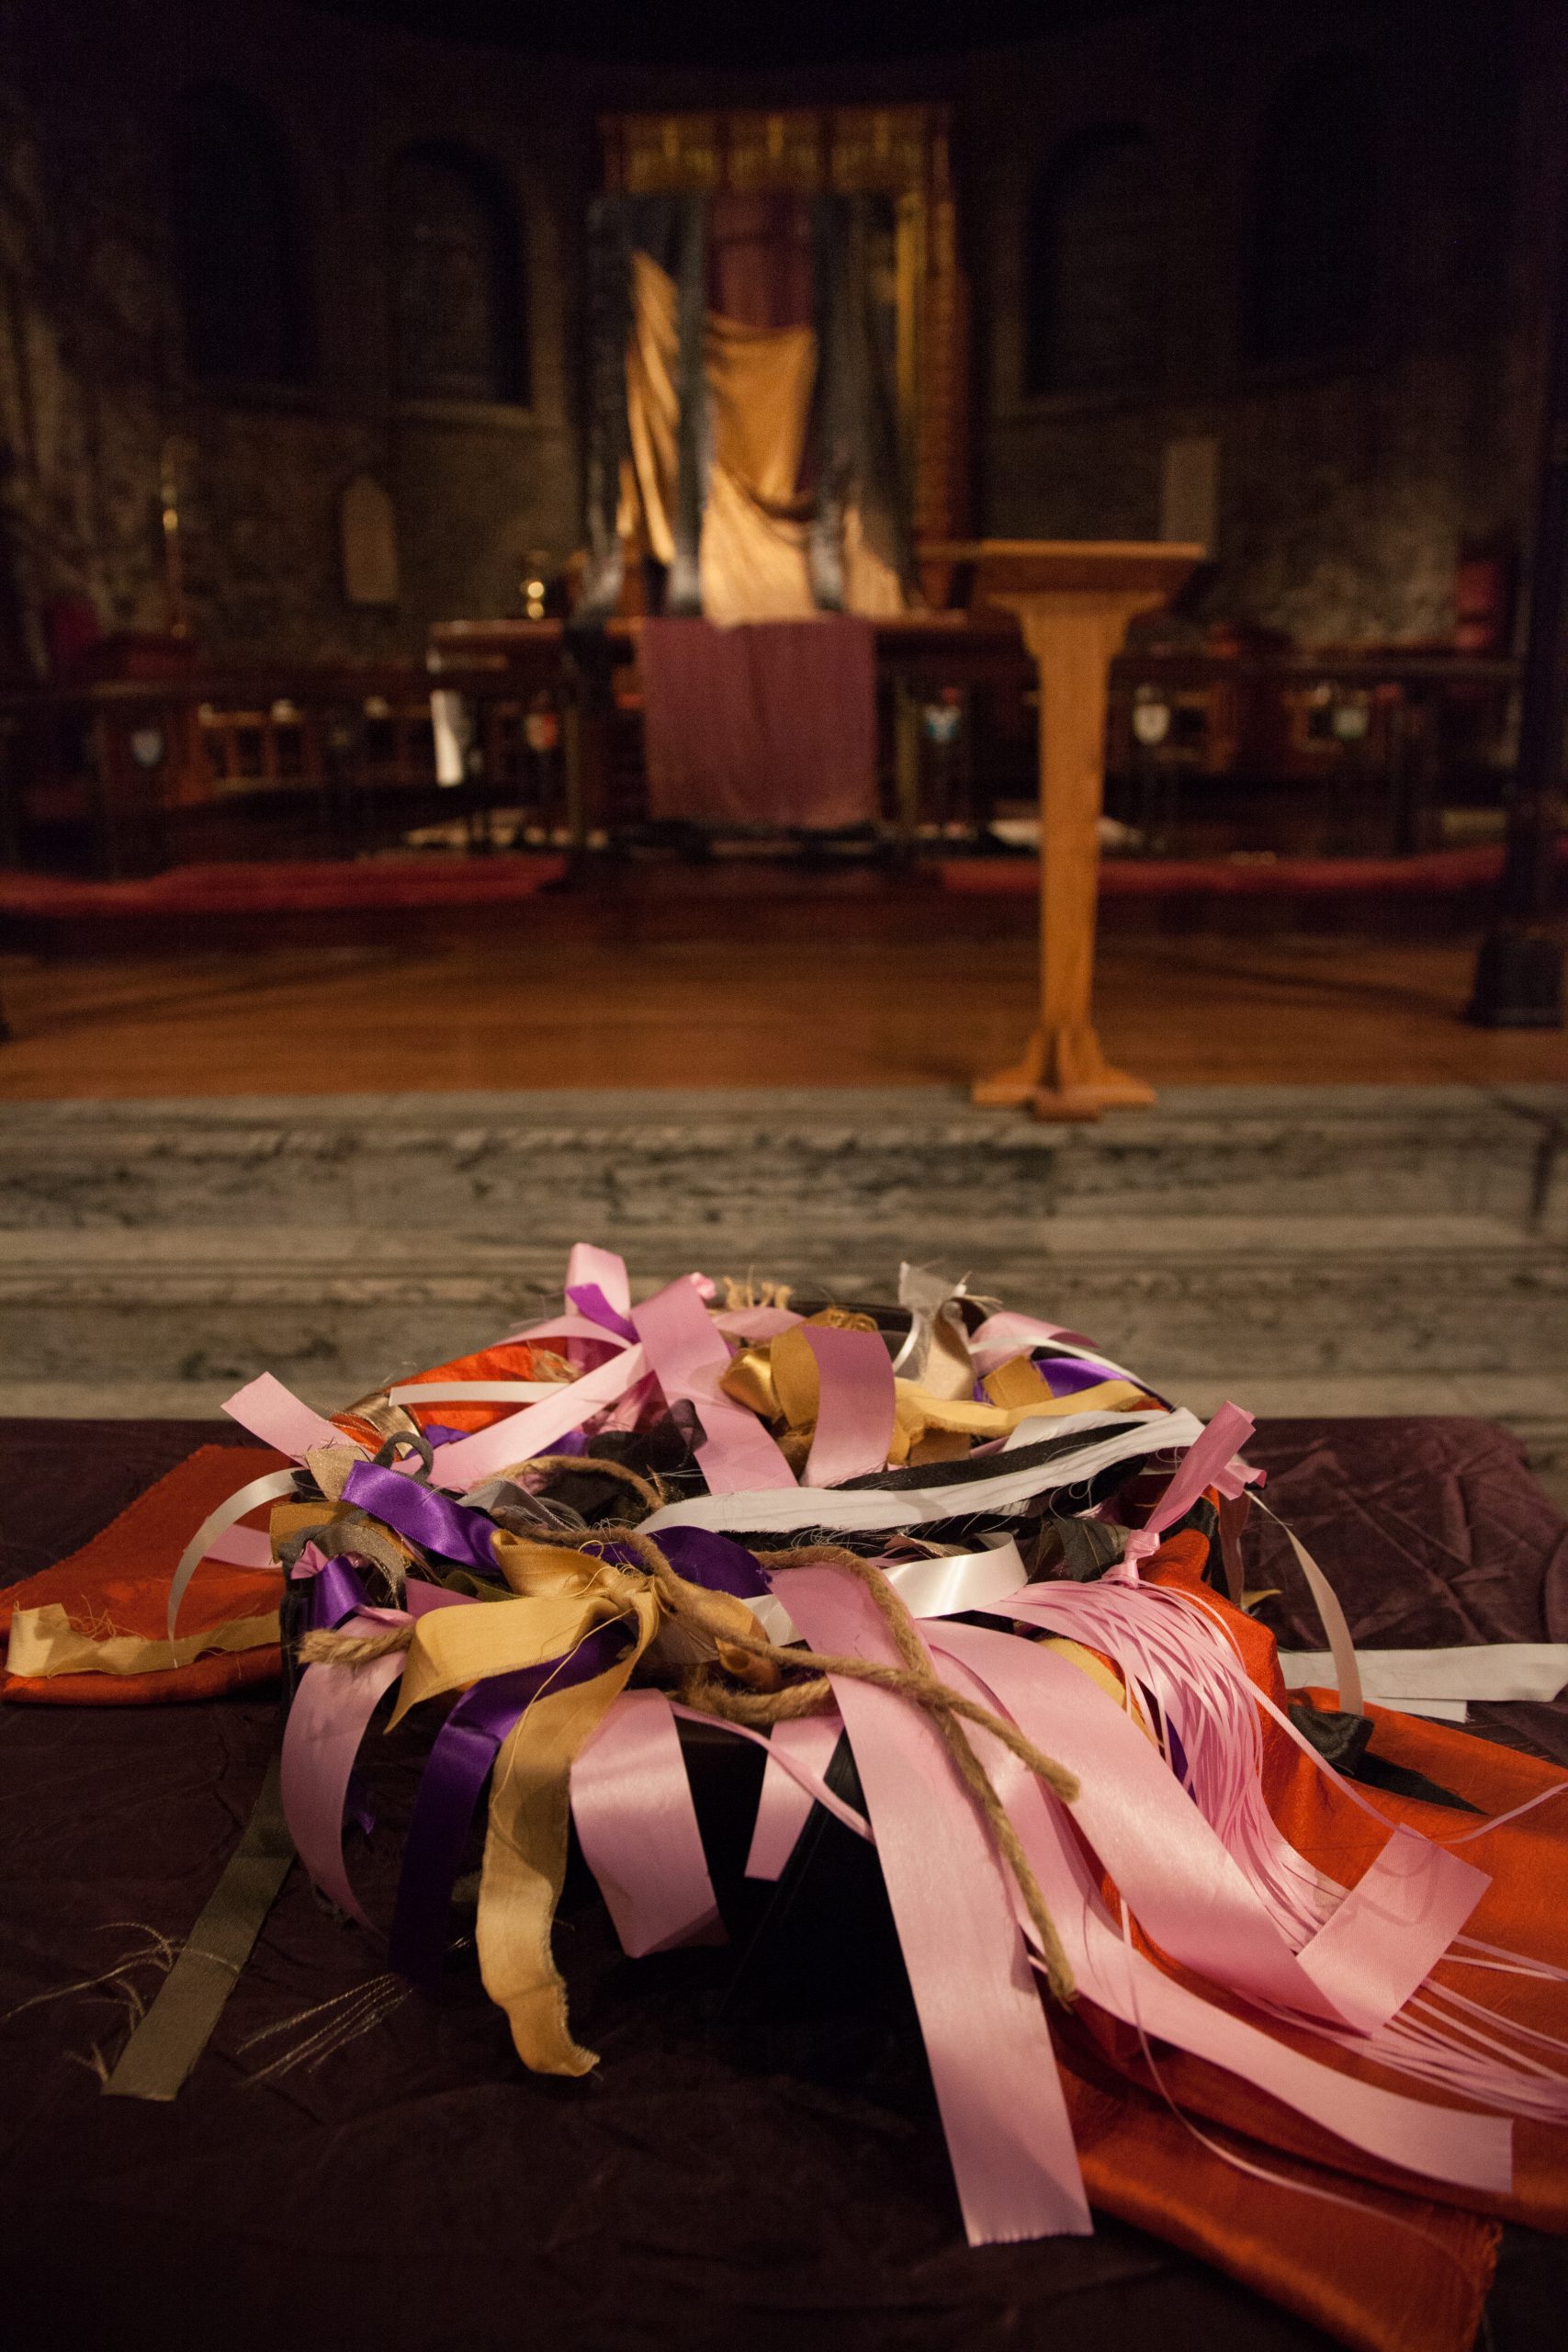 At the Service of Lament and Hope at KC2015, each person gathered received a ribbon to hold throughout the service. 